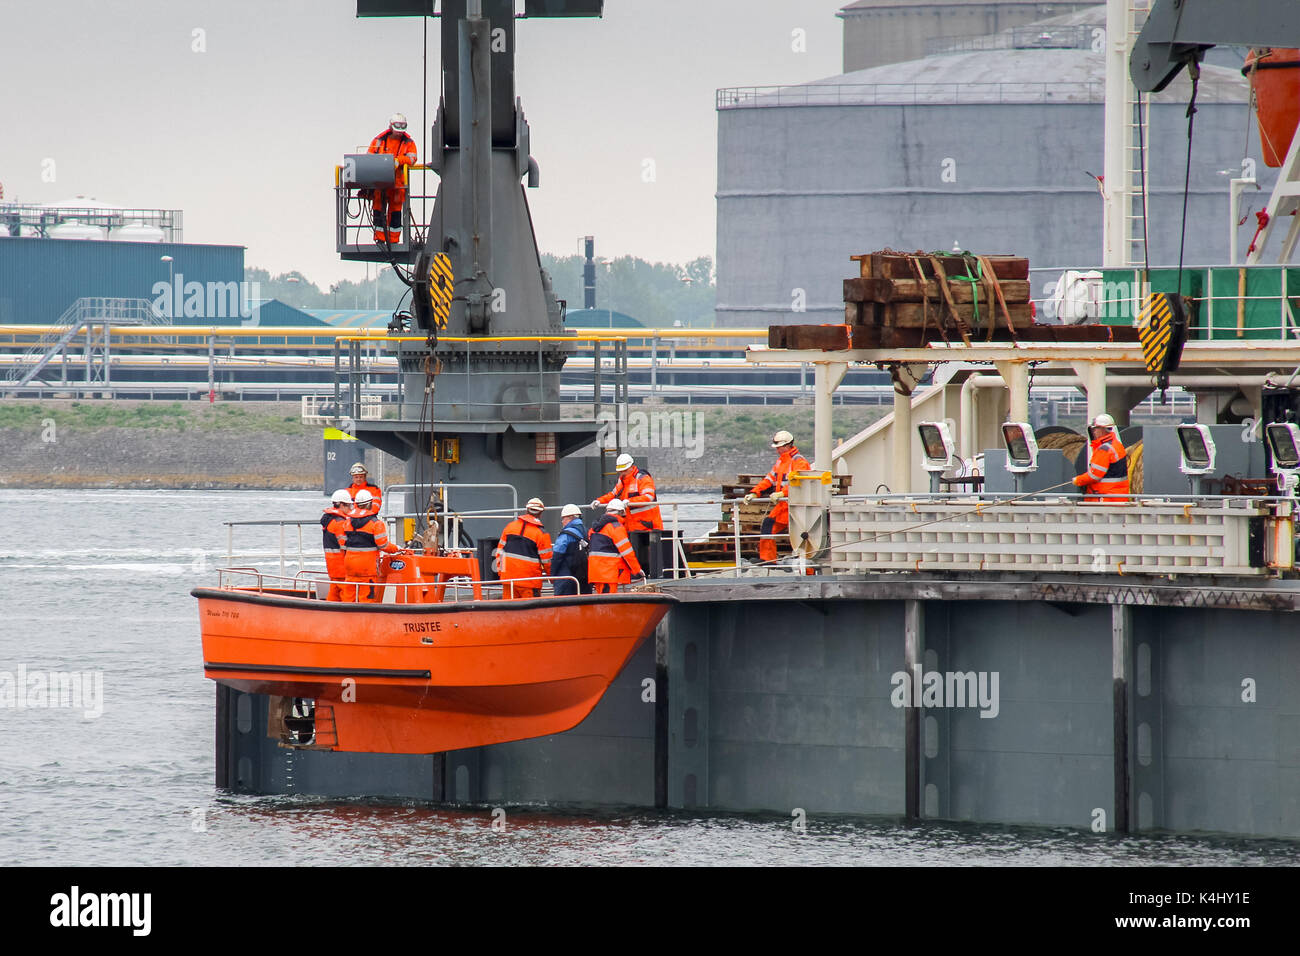 Caland Canal, Rotterdam, the Netherlands, May 29, 2014: The crew of the Dockwise semi-submersible ship Trustee is lifted back onboard in the workboat Stock Photo